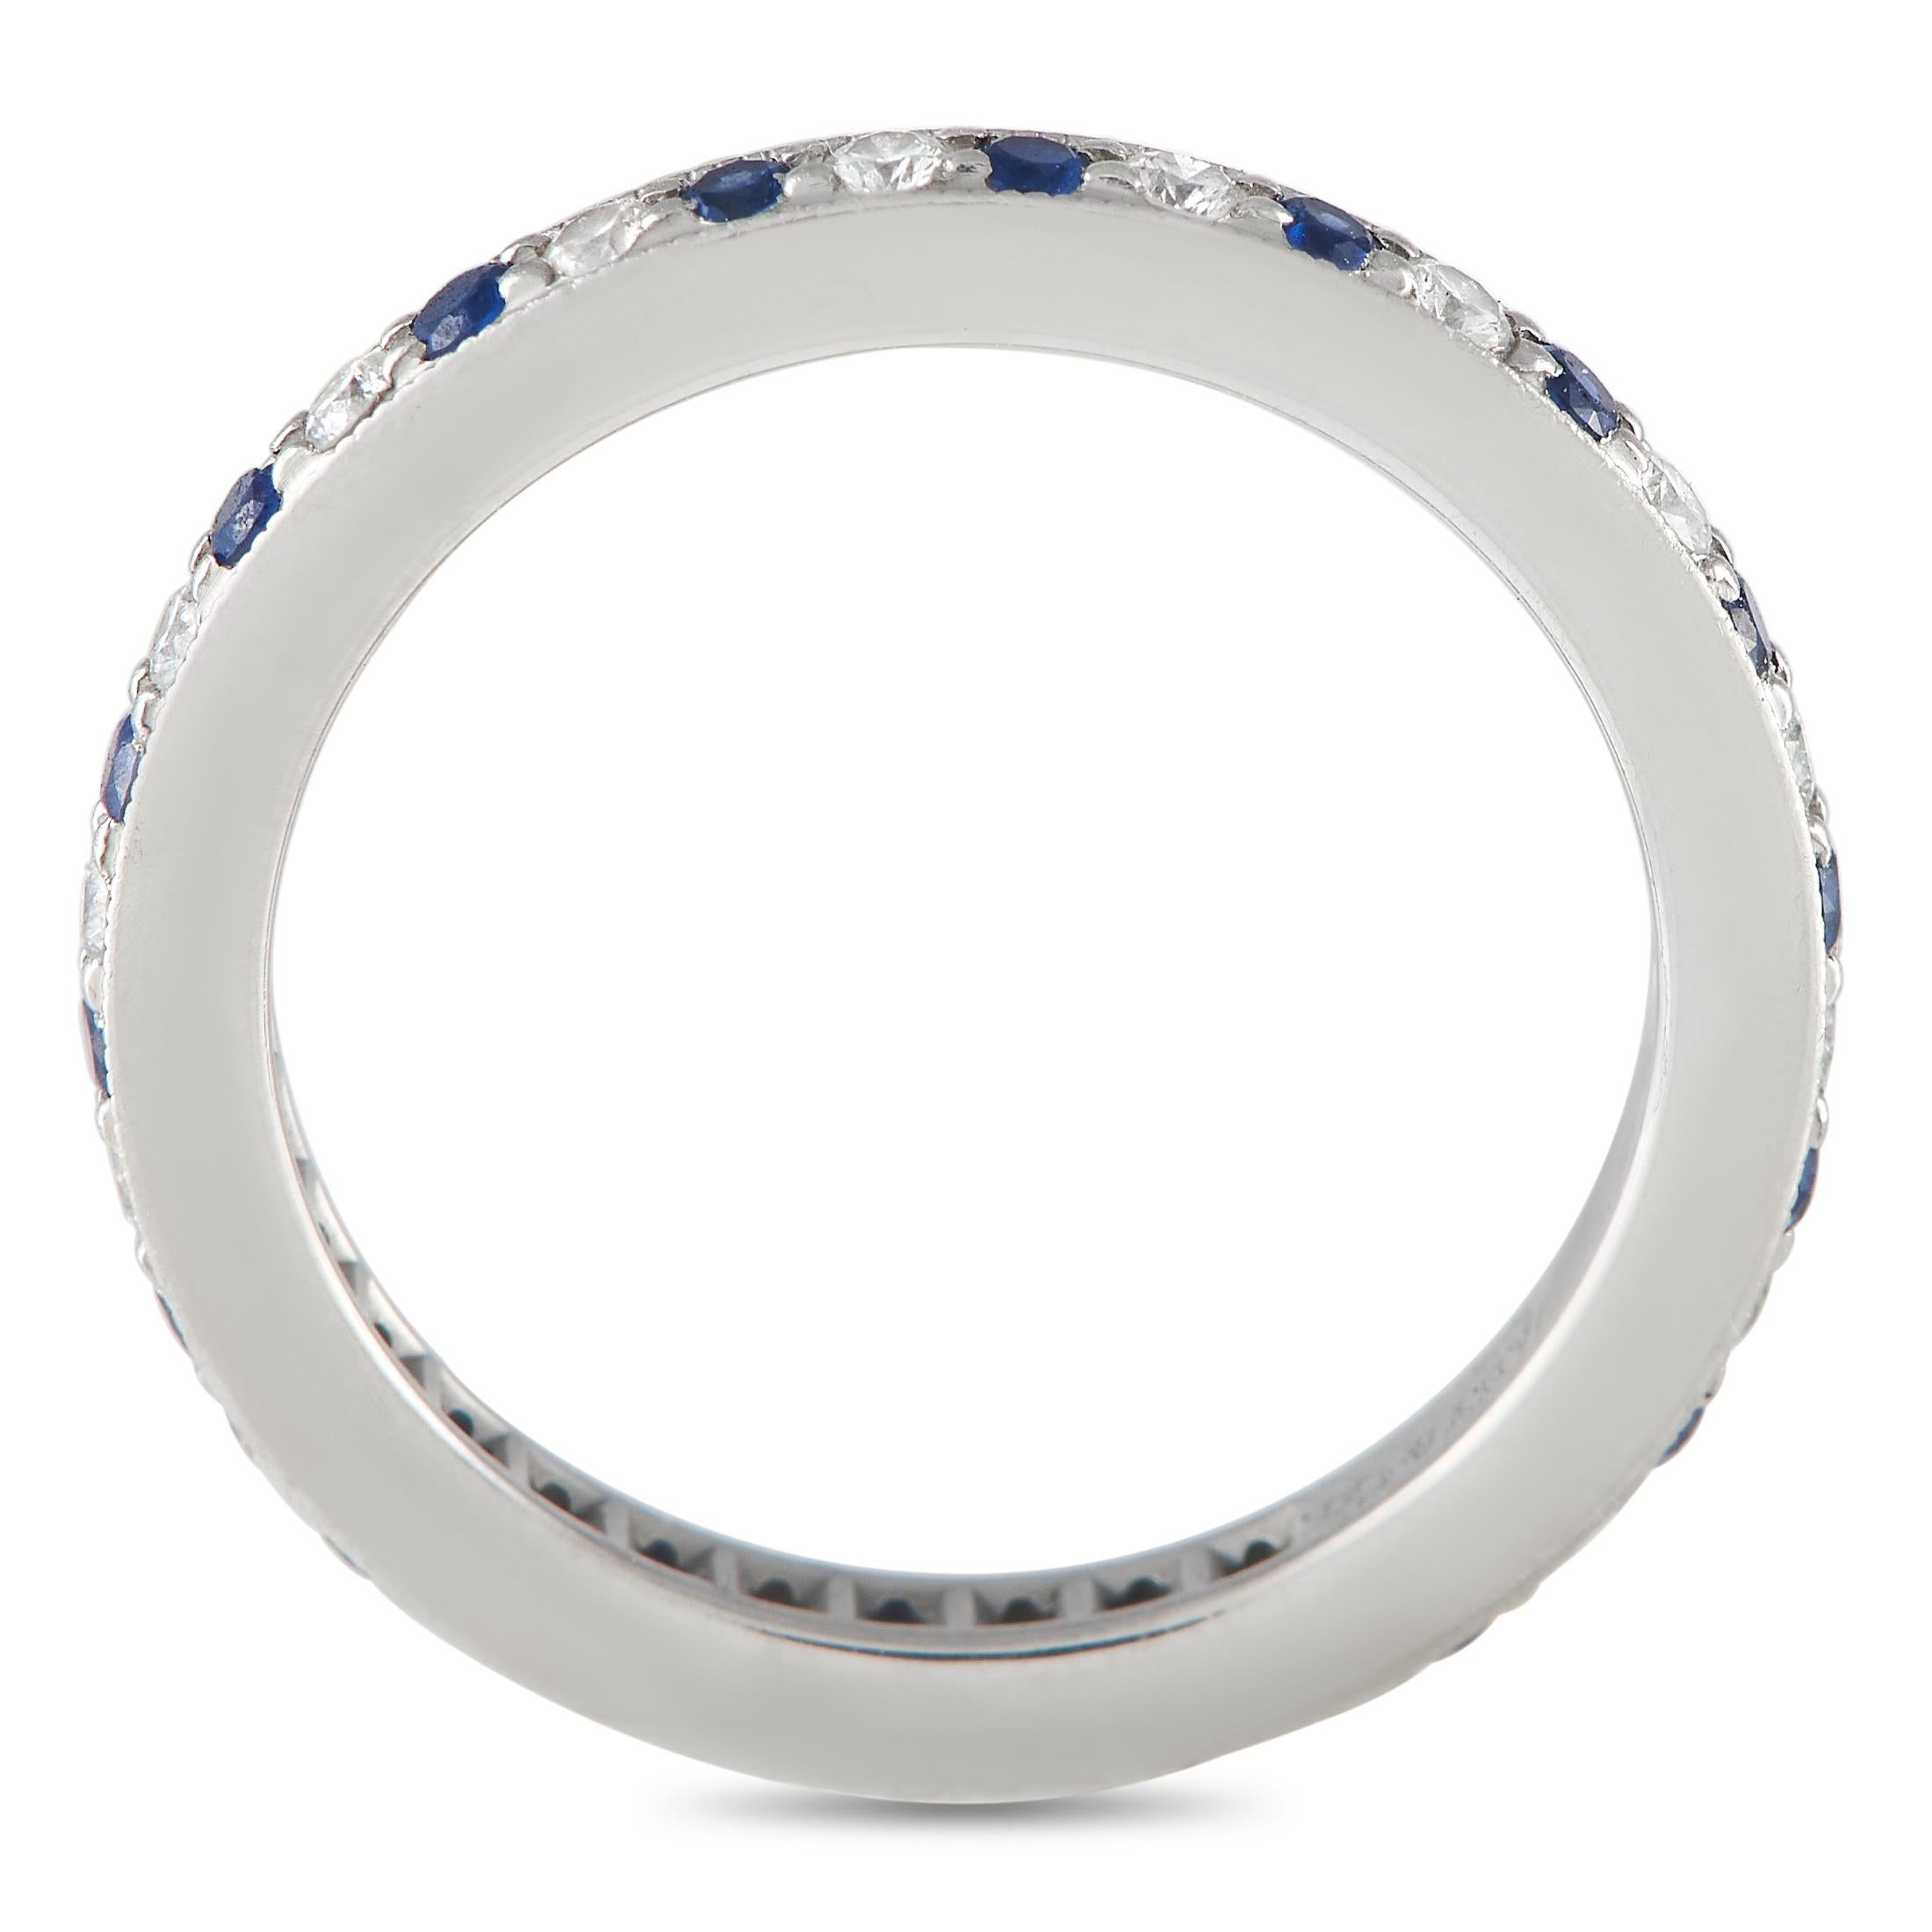 Bearing a full circle of alternating round diamonds and sapphires, this platinum eternity band would make a beautiful and timeless symbol of never-ending love. The band is only 2mm thick and has a ridged edge for that added texture and style. Get